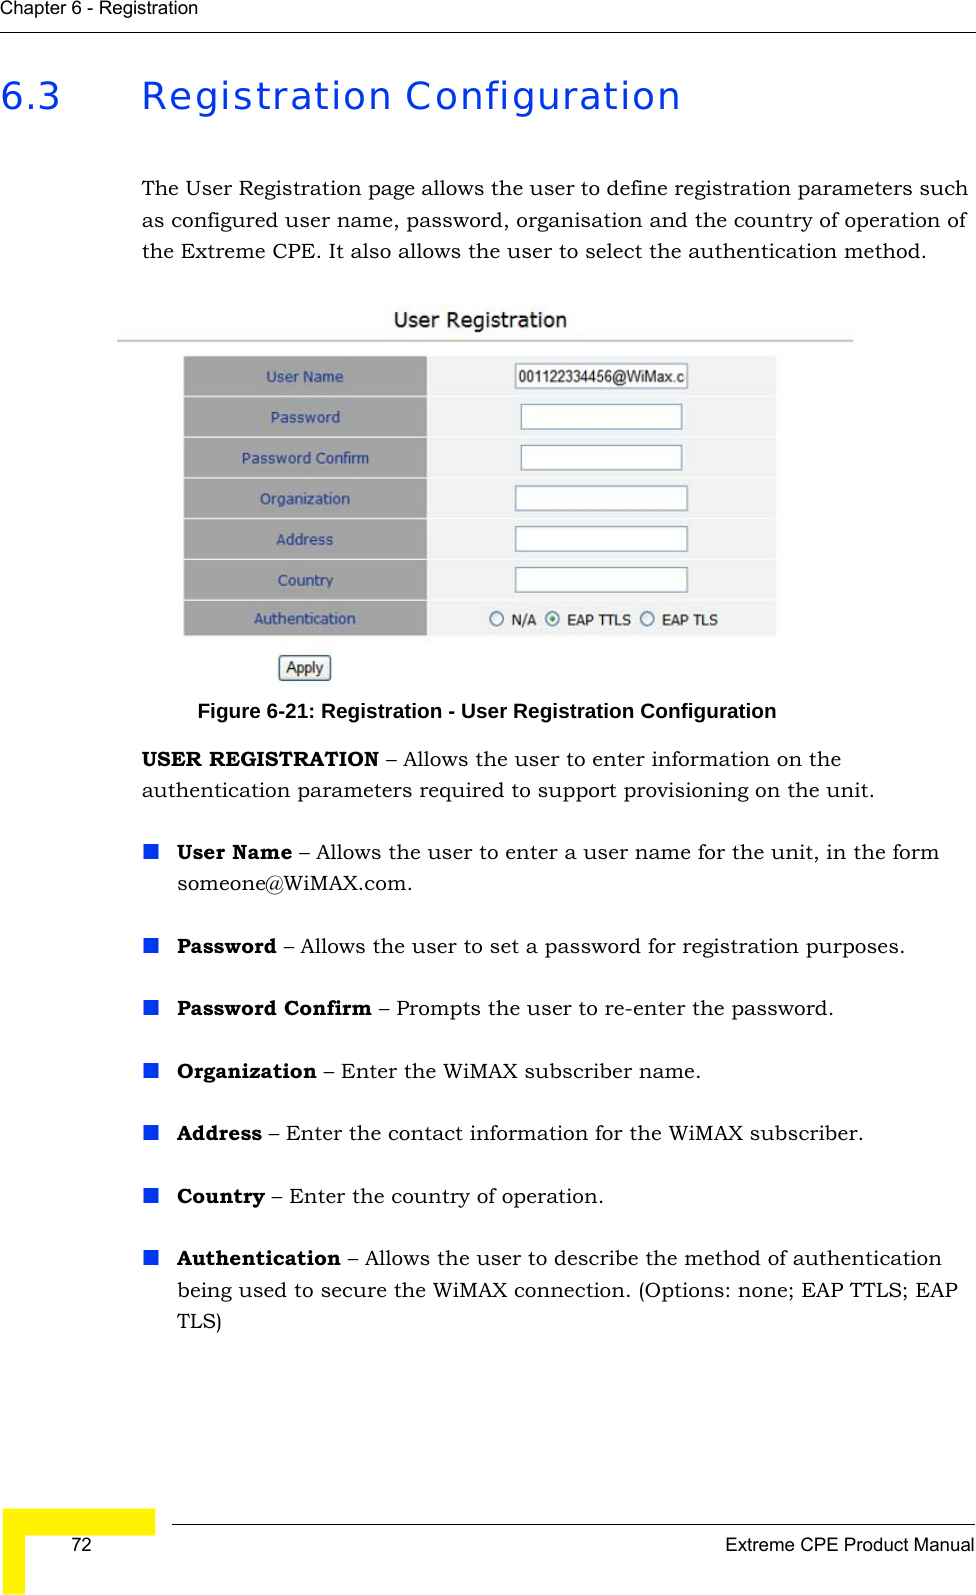  72 Extreme CPE Product ManualChapter 6 - Registration6.3 Registration ConfigurationThe User Registration page allows the user to define registration parameters such as configured user name, password, organisation and the country of operation of the Extreme CPE. It also allows the user to select the authentication method.Figure 6-21: Registration - User Registration ConfigurationUSER REGISTRATION – Allows the user to enter information on the authentication parameters required to support provisioning on the unit.User Name – Allows the user to enter a user name for the unit, in the form someone@WiMAX.com.Password – Allows the user to set a password for registration purposes.Password Confirm – Prompts the user to re-enter the password.Organization – Enter the WiMAX subscriber name.Address – Enter the contact information for the WiMAX subscriber.Country – Enter the country of operation.Authentication – Allows the user to describe the method of authentication being used to secure the WiMAX connection. (Options: none; EAP TTLS; EAP TLS)